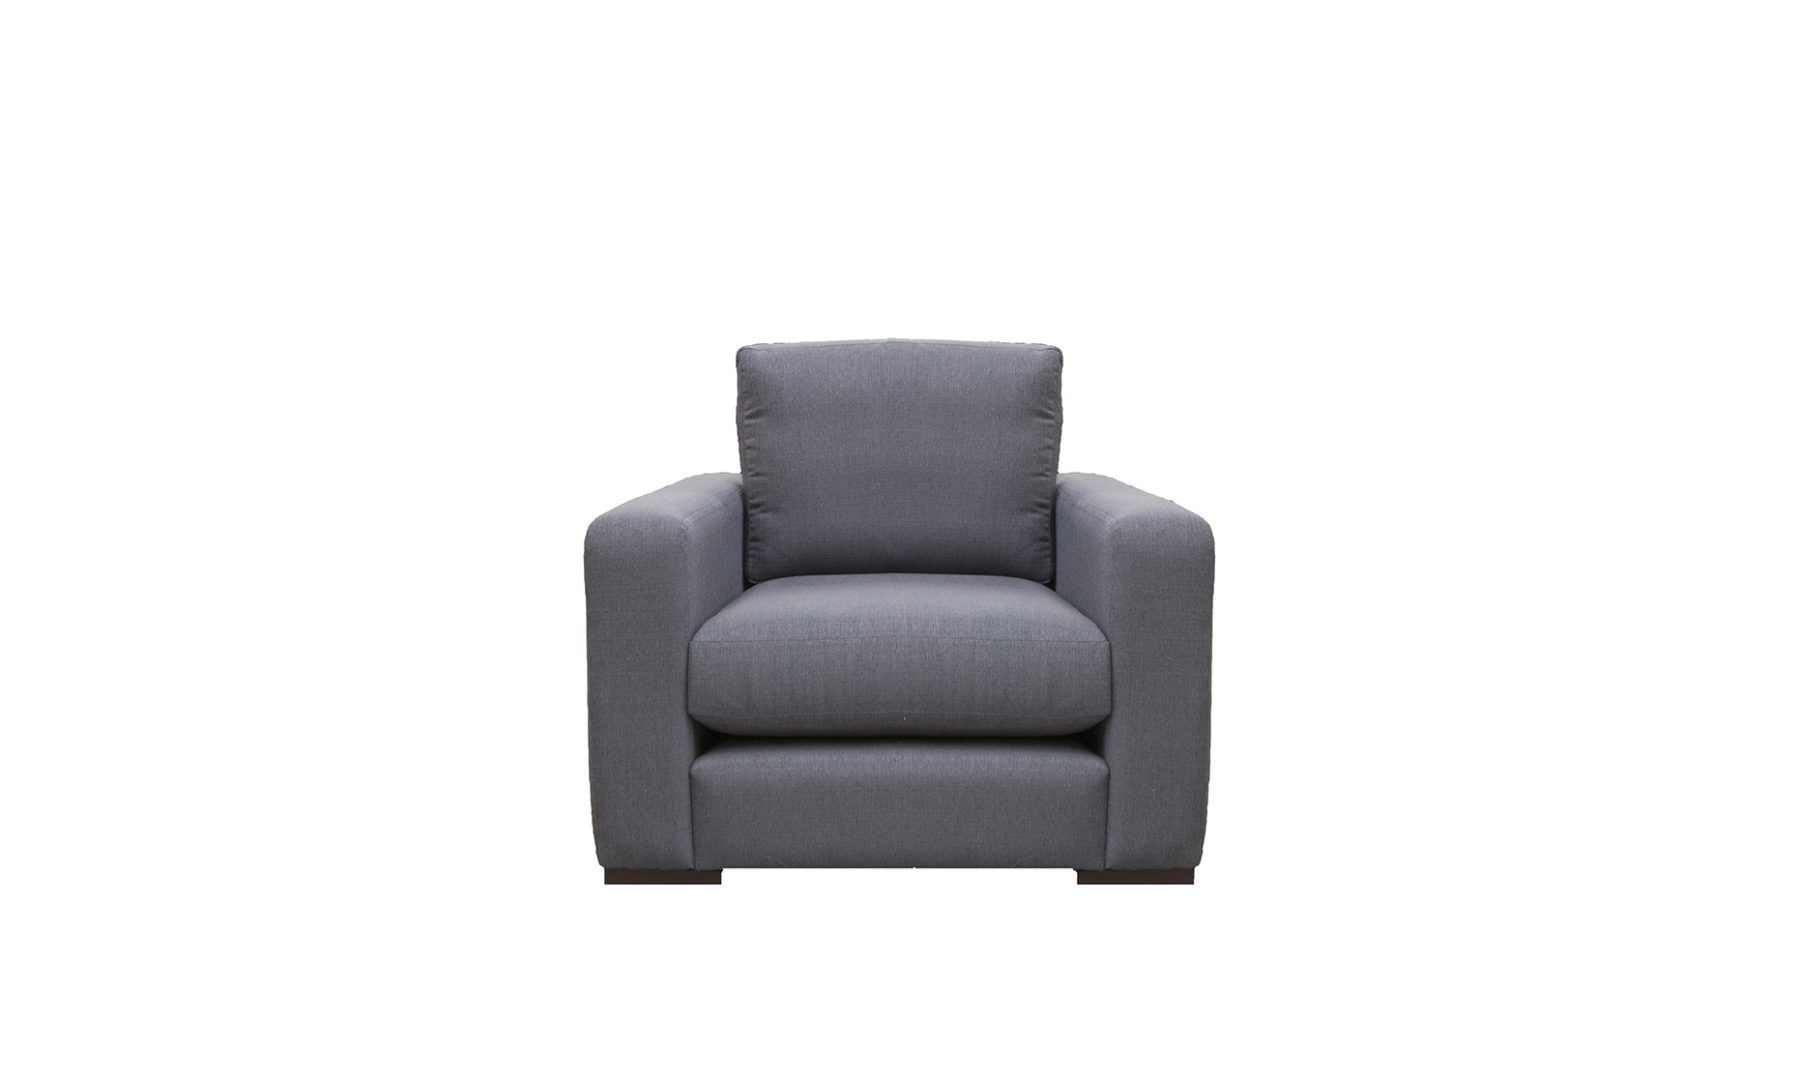 Collins Chair in Aosta Charcoal